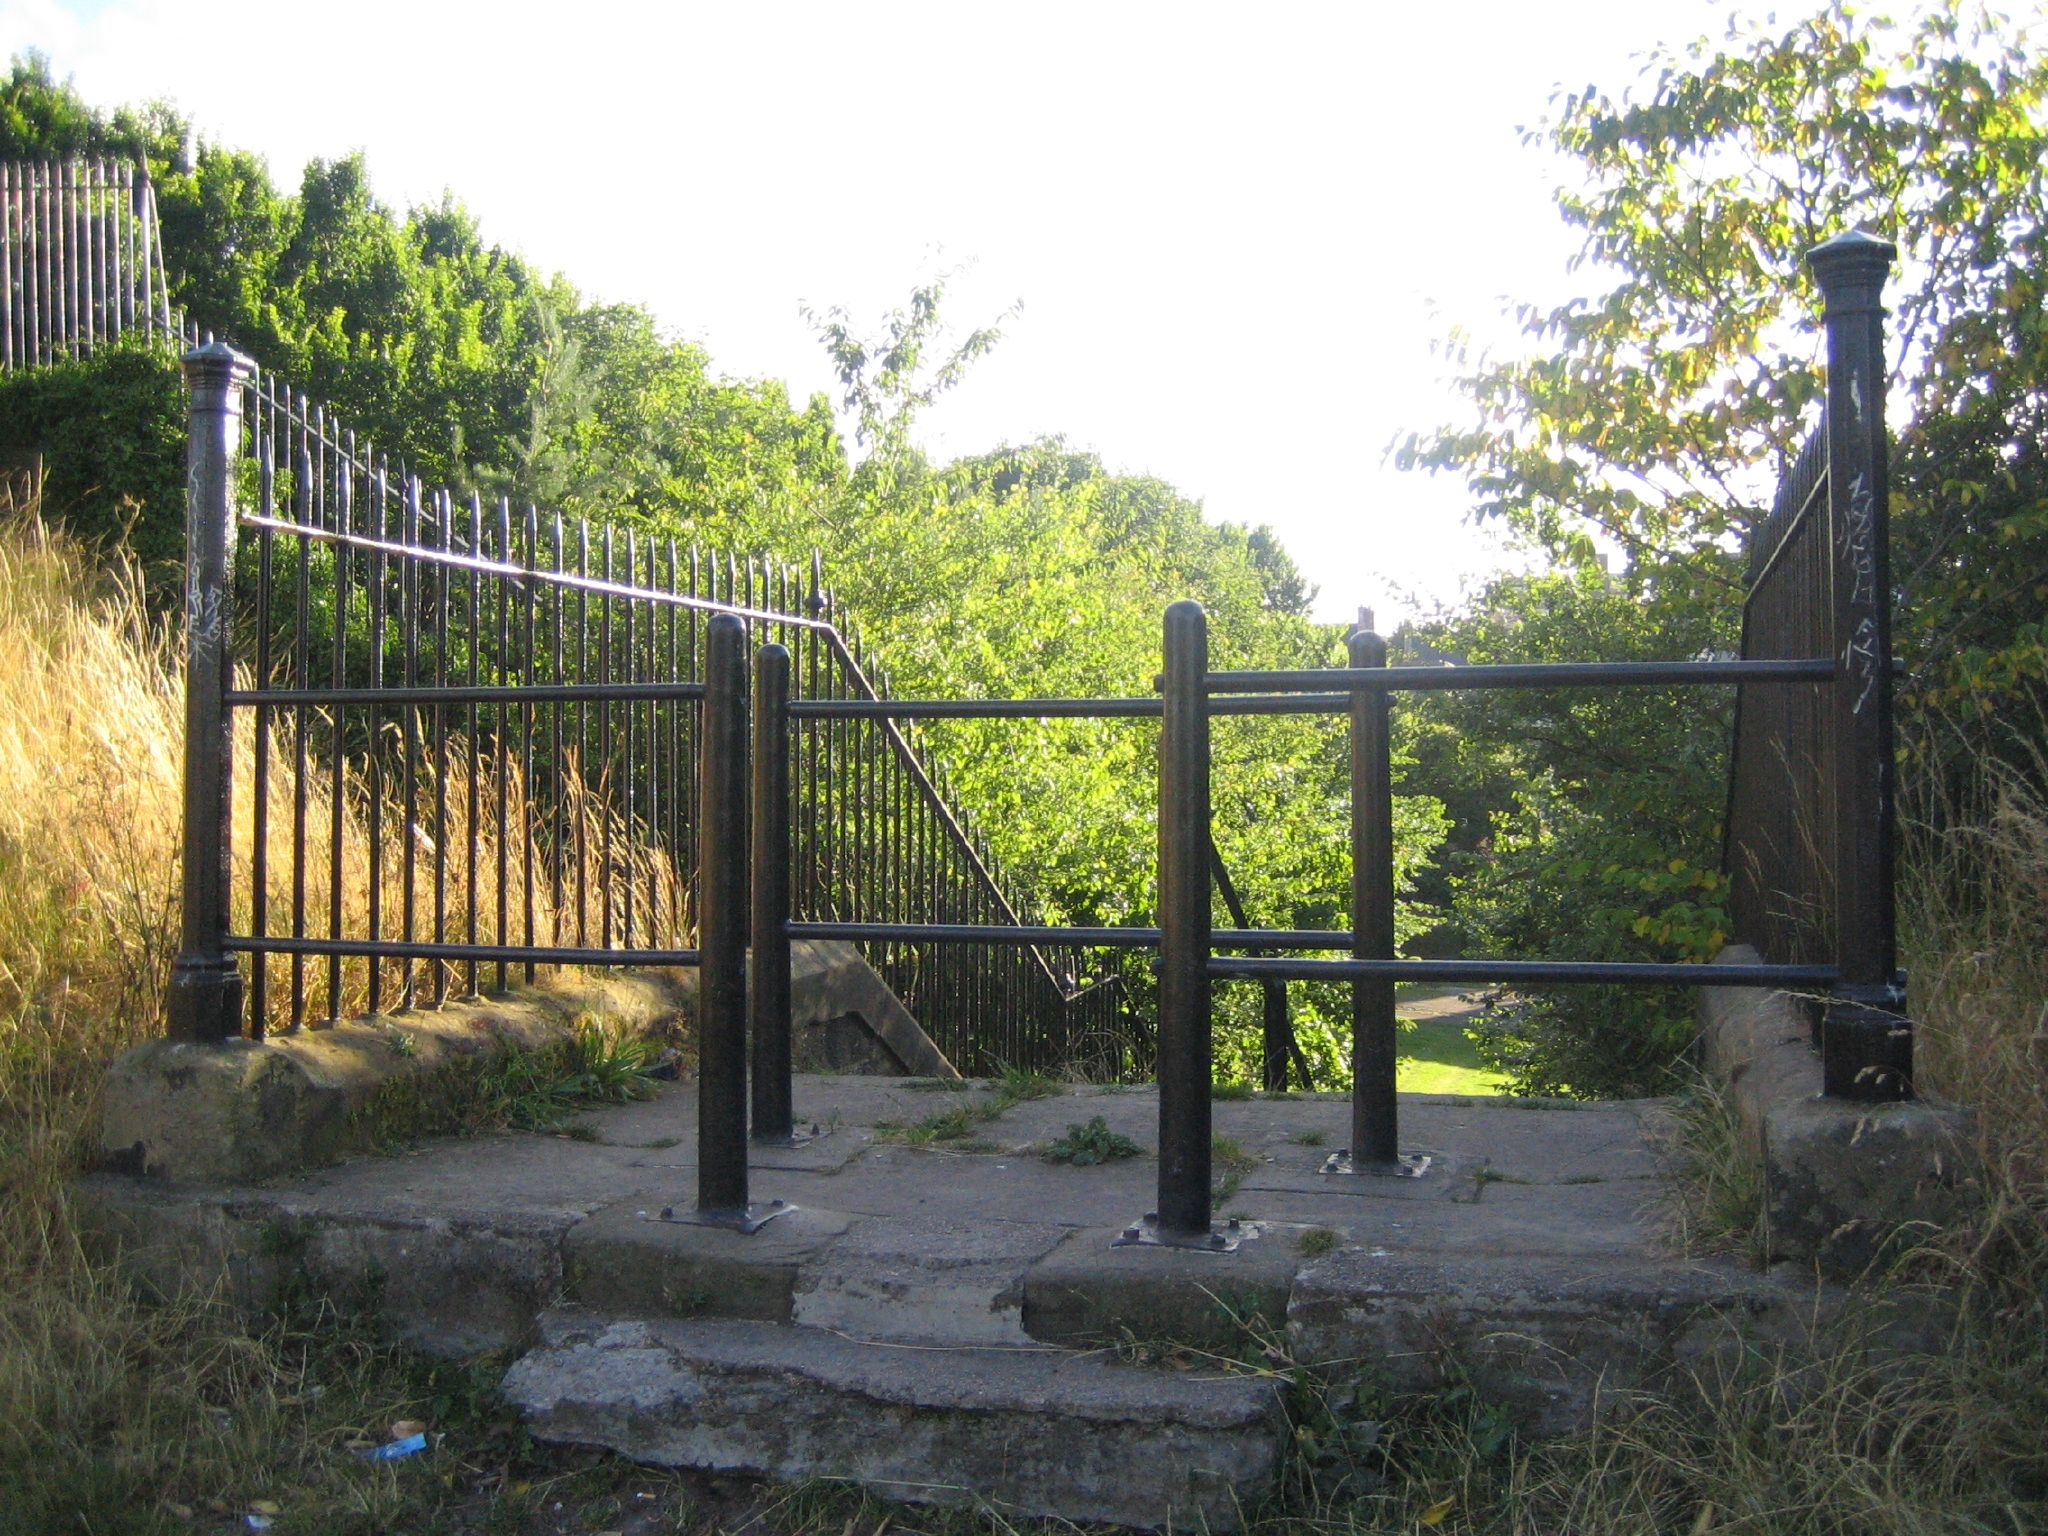 File:Dumbiedykes Gate to nowhere (31173299).jpg - Wikimedia Commons